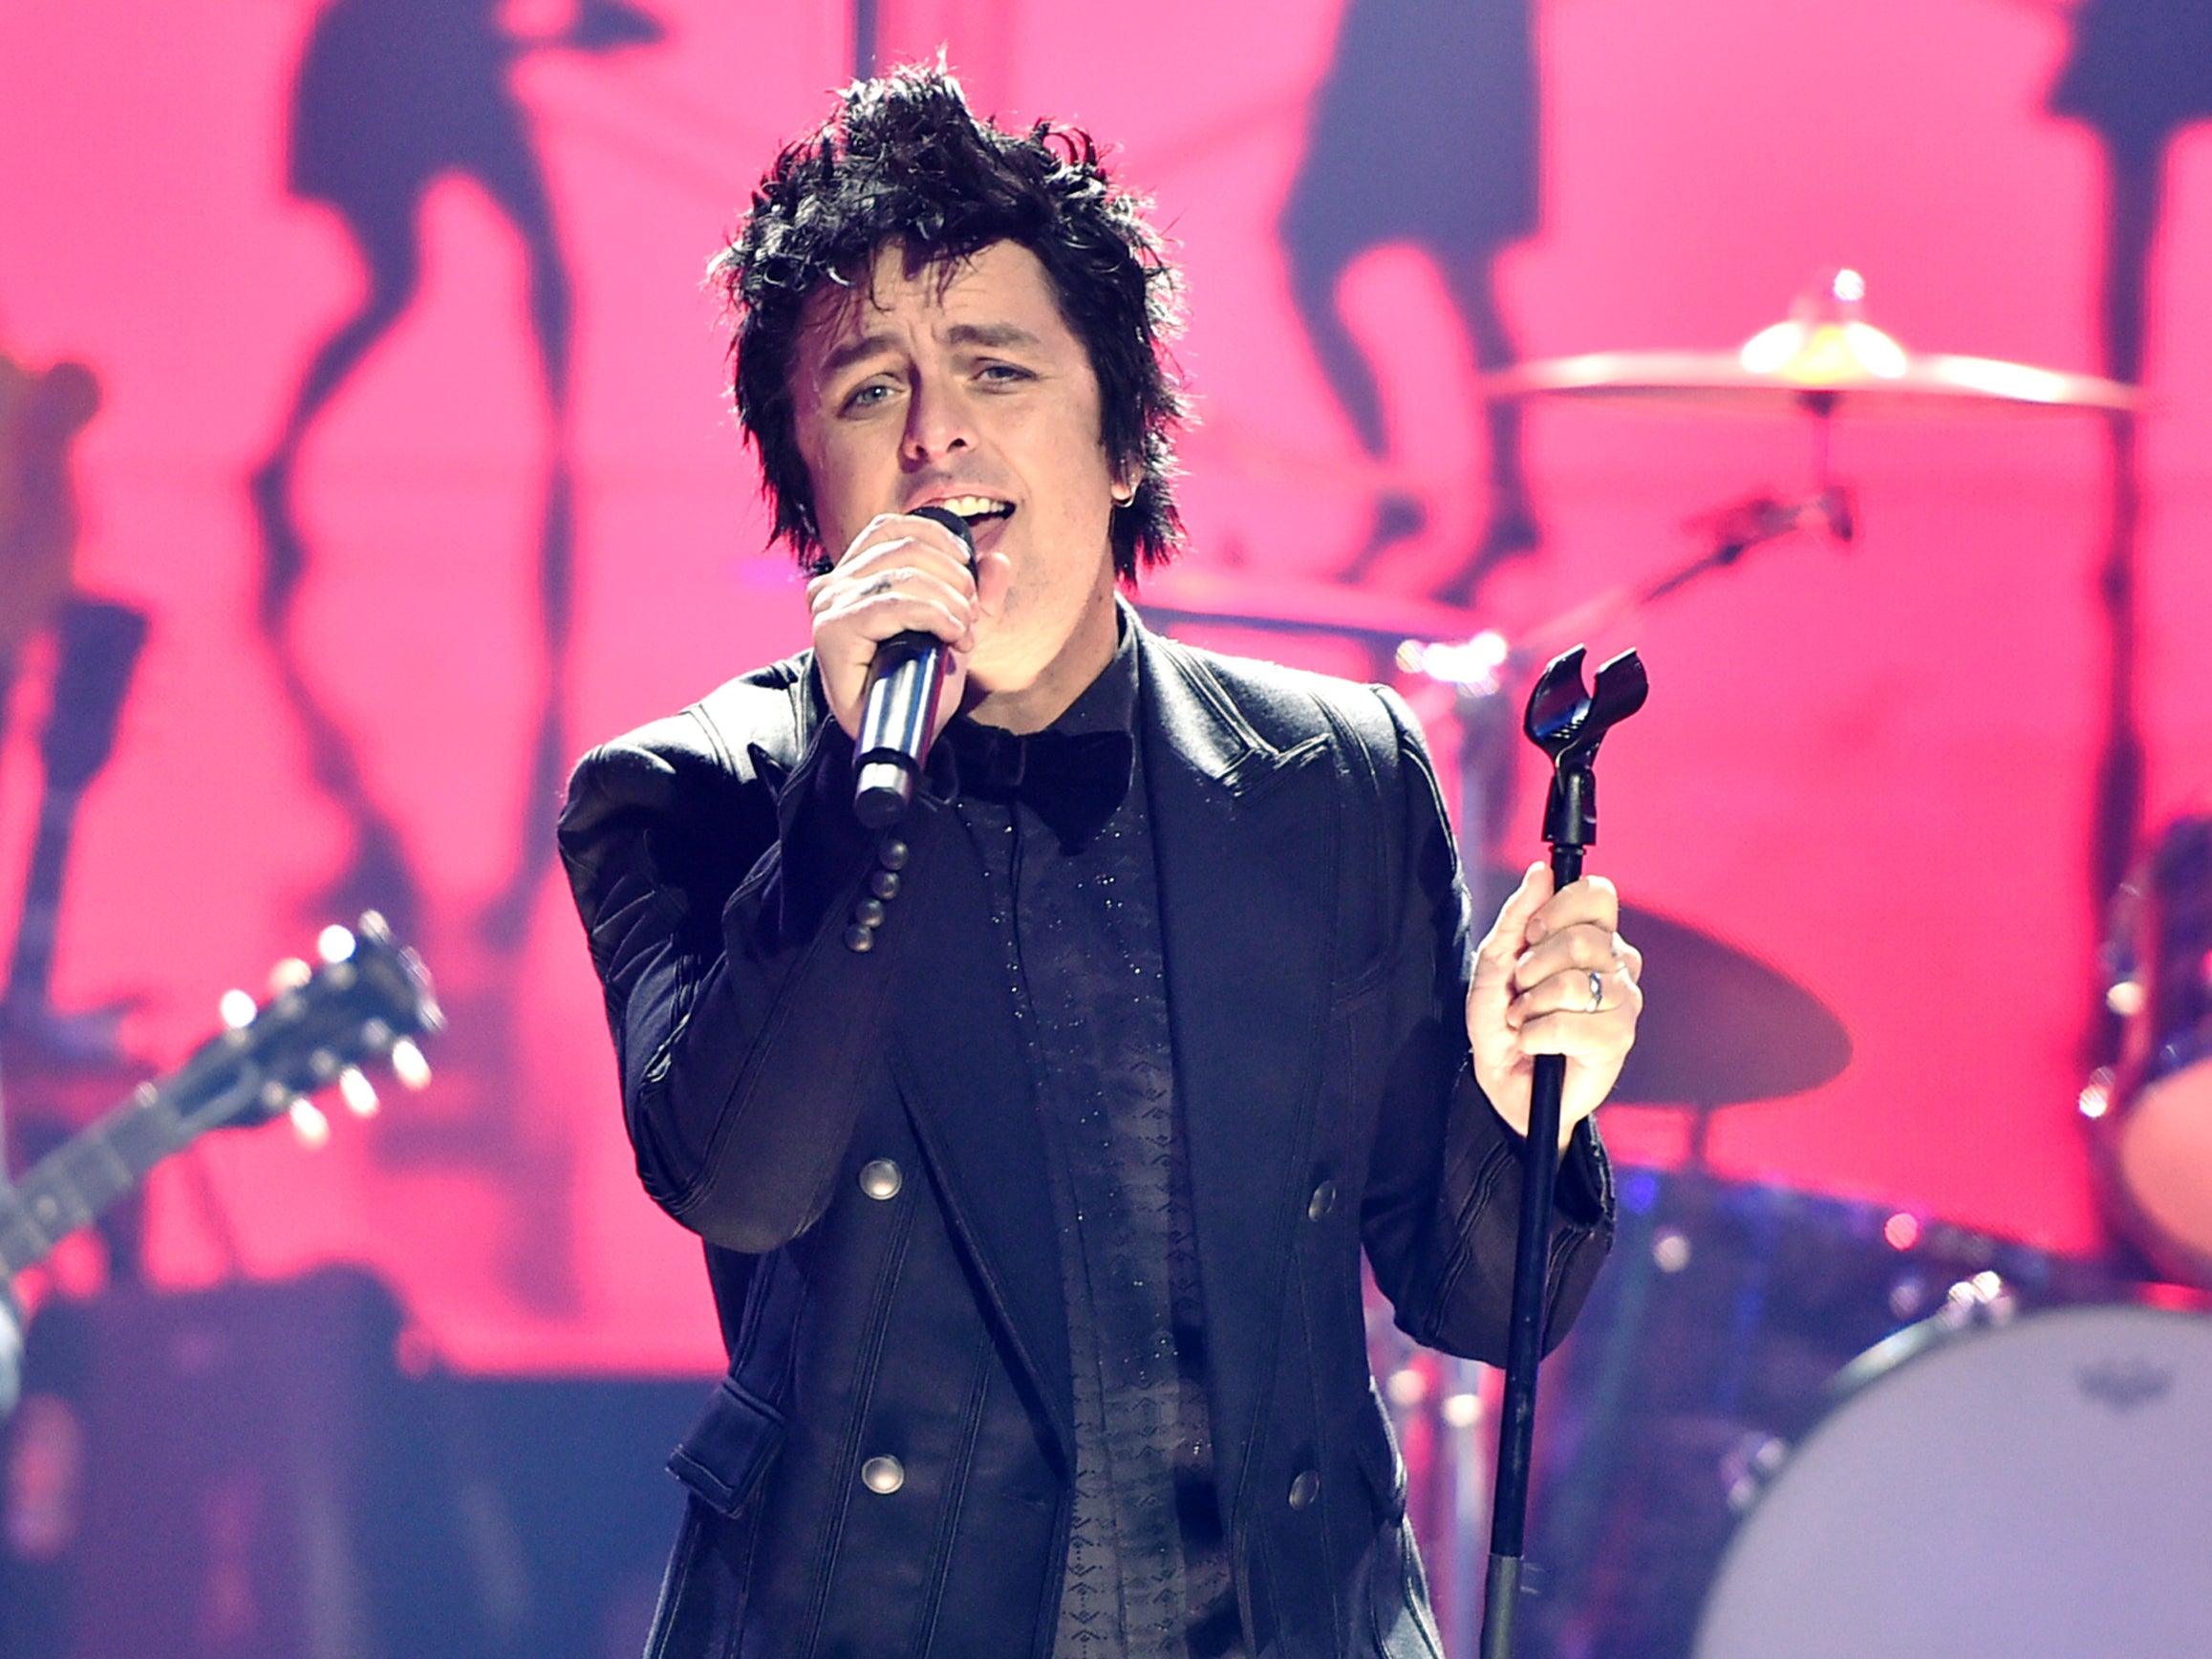 Billie Joe Armstrong of Green Day performs in Los Angeles, California on 23 November 2019